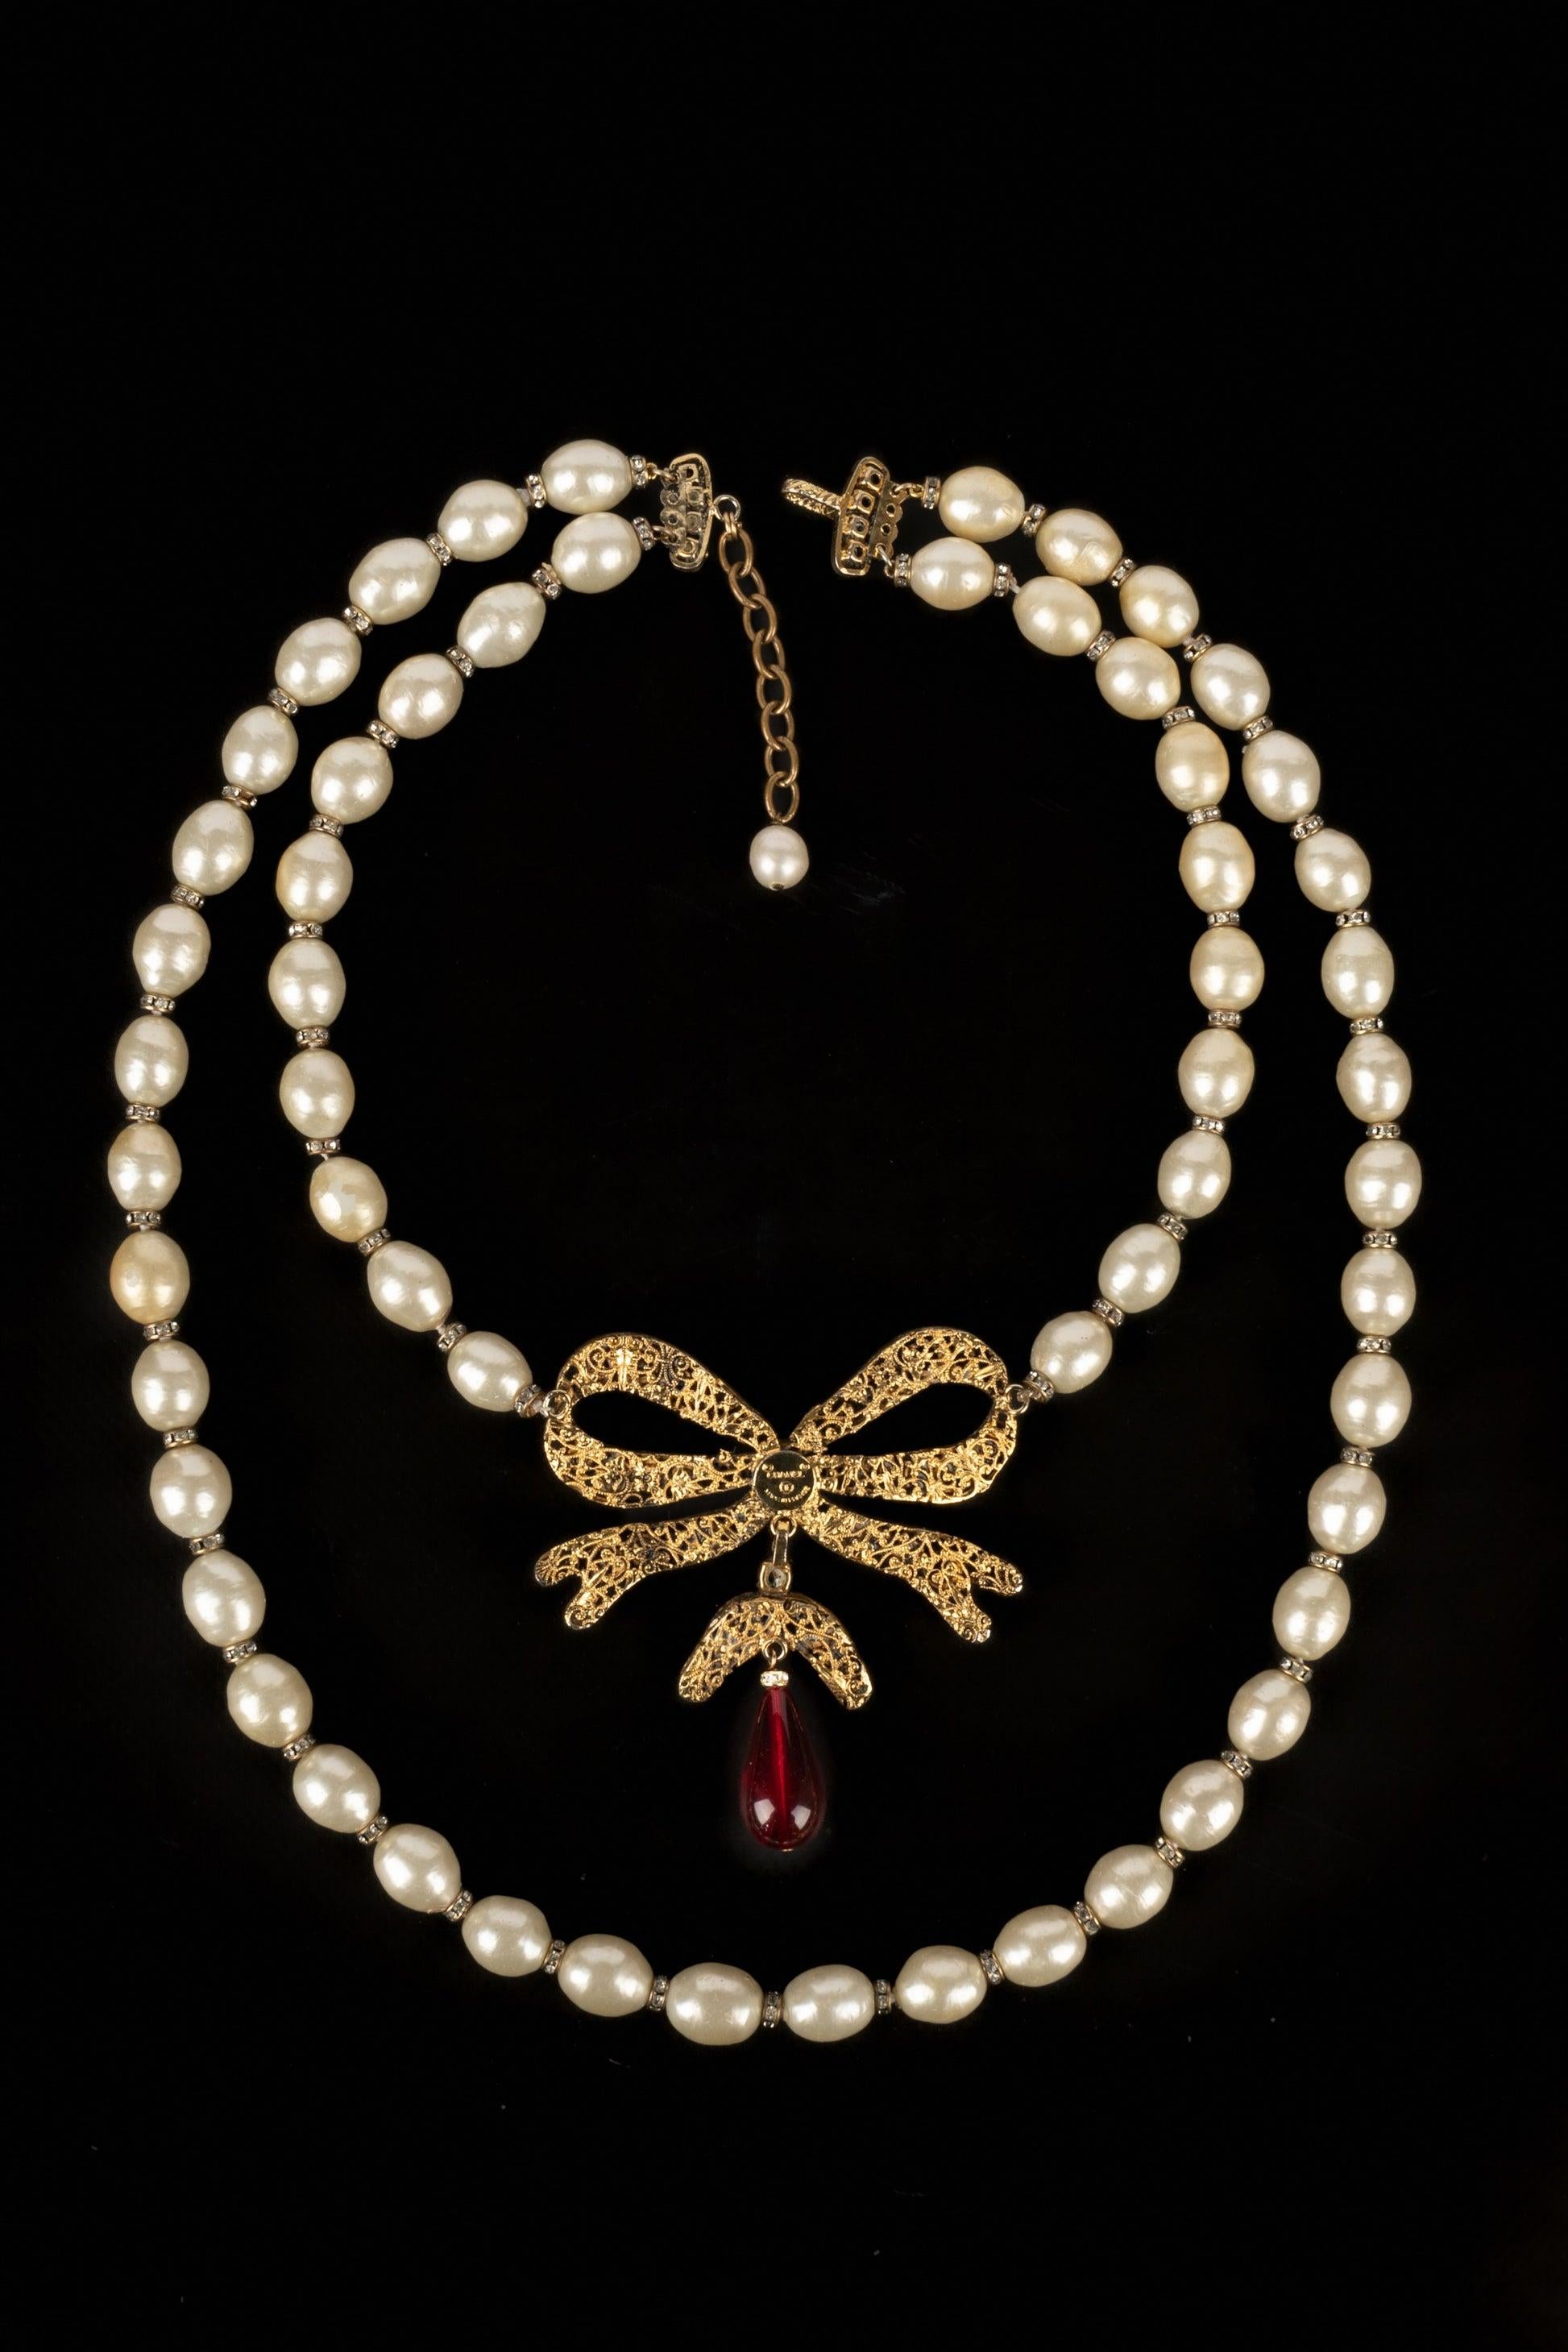 Chanel - (Made in France) Golden metal necklace with costume pearls, rhinestones, and red glass paste. To be mentioned, some pearls have areas without the pearly material.

Additional information:
Condition: Good condition
Dimensions: Length: from